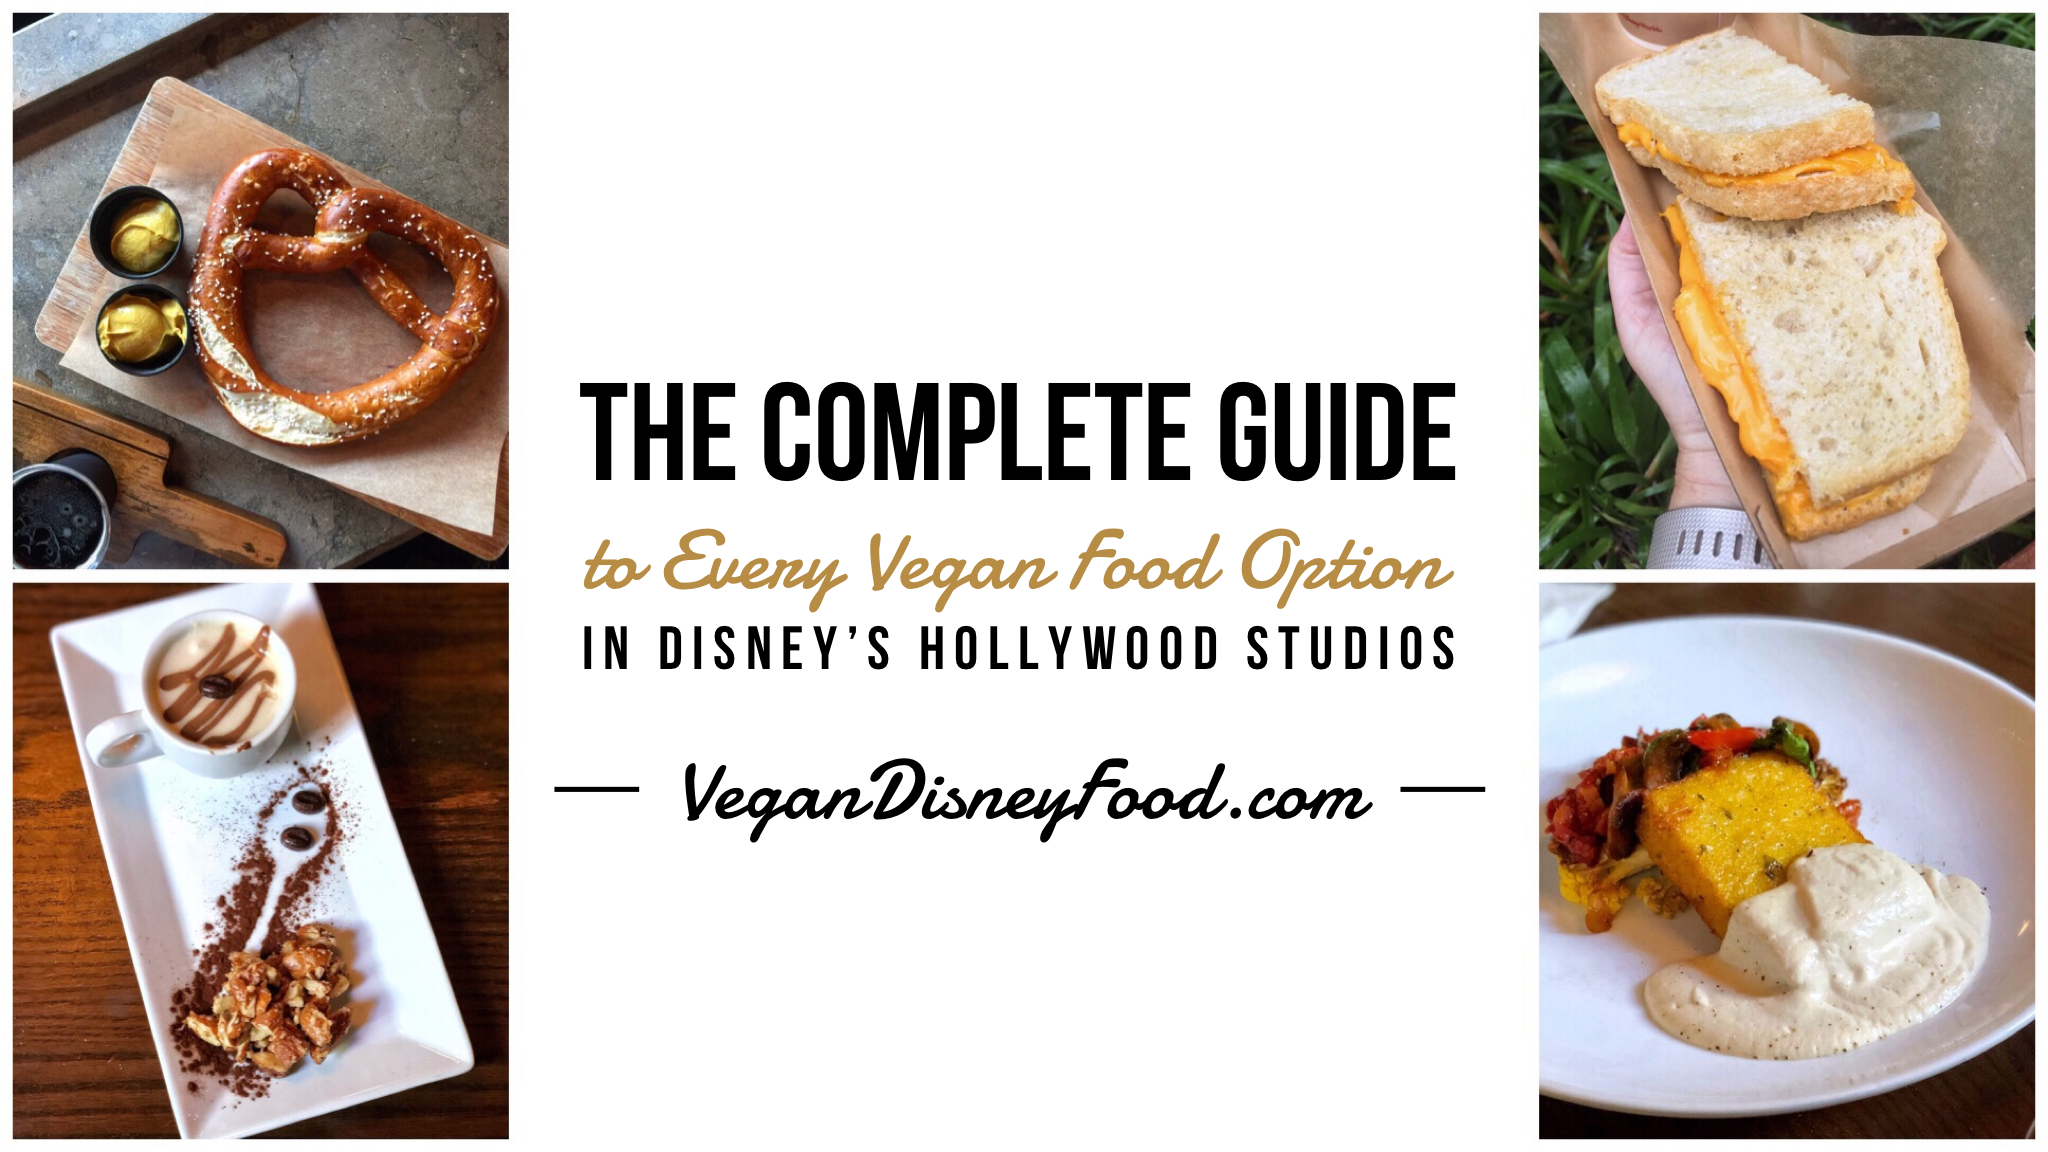 The Complete Guide to Every Vegan Food Option in Disney’s Hollywood Studios at Walt Disney World